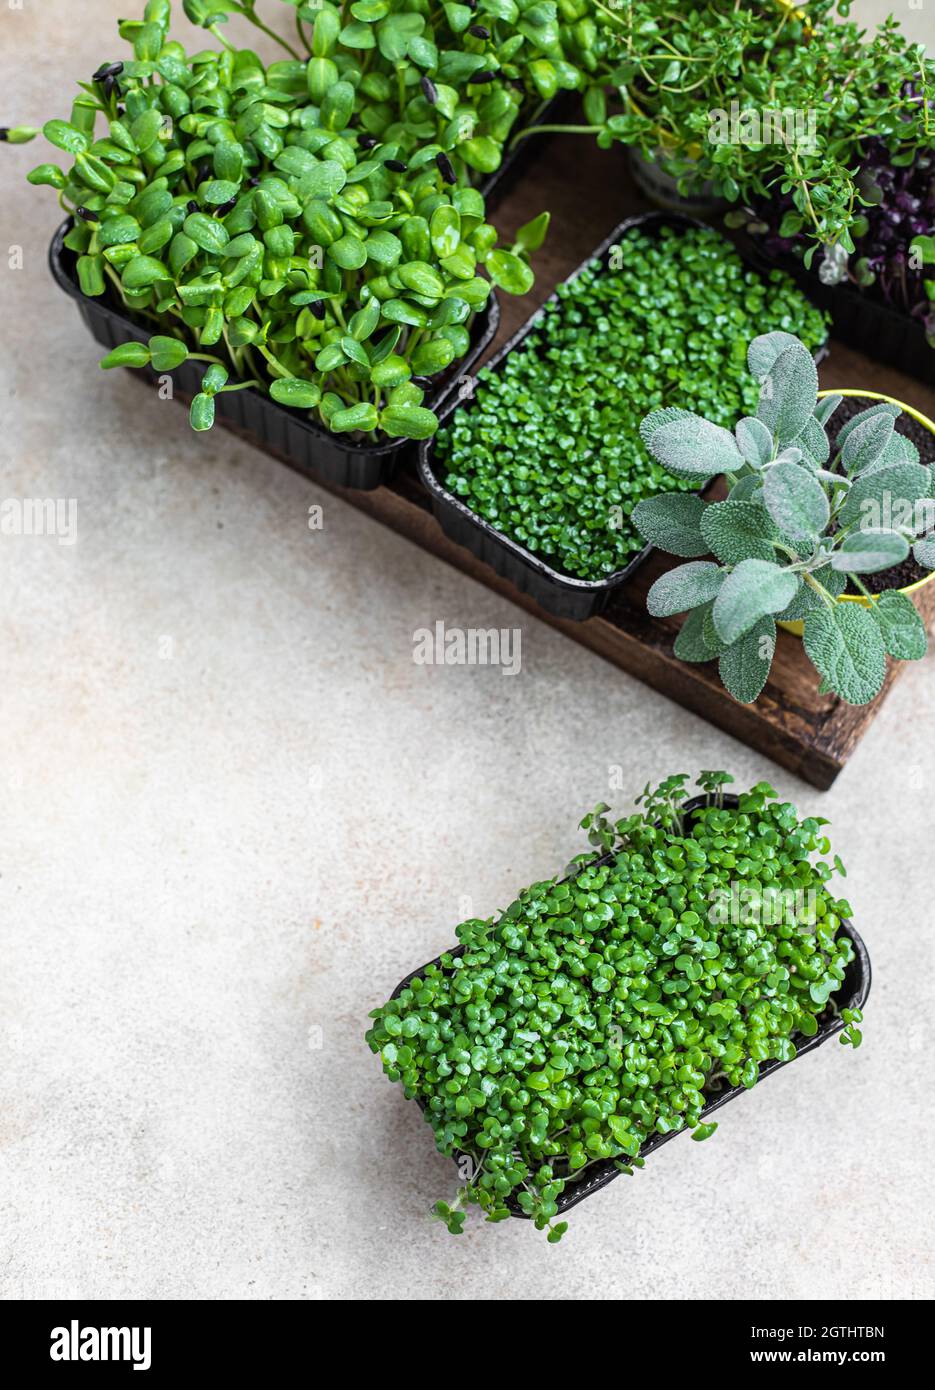 Different Types Of Micro Greens In Containers. Vegan And Healthy Eating Concept. Stock Photo